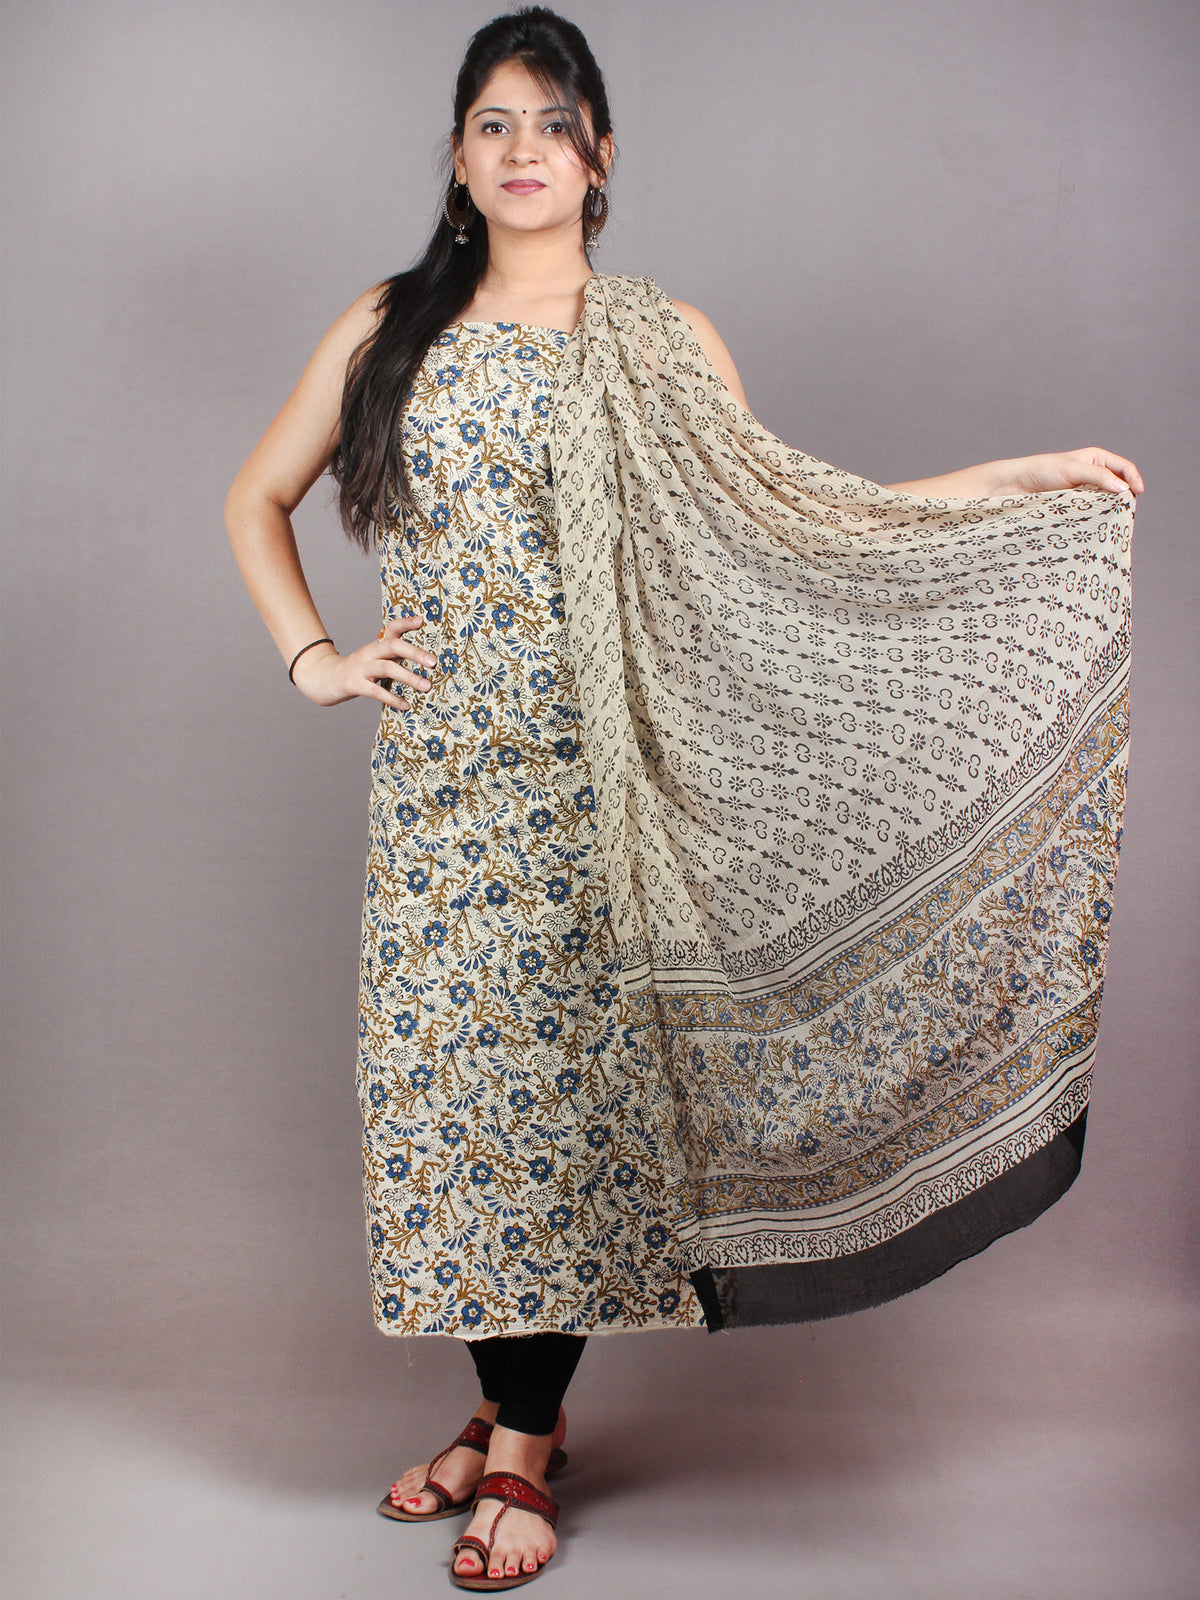 Off White Blue Brown Hand Block Printed Cotton Suit-Salwar Fabric With Chiffon Dupatta - S1628048